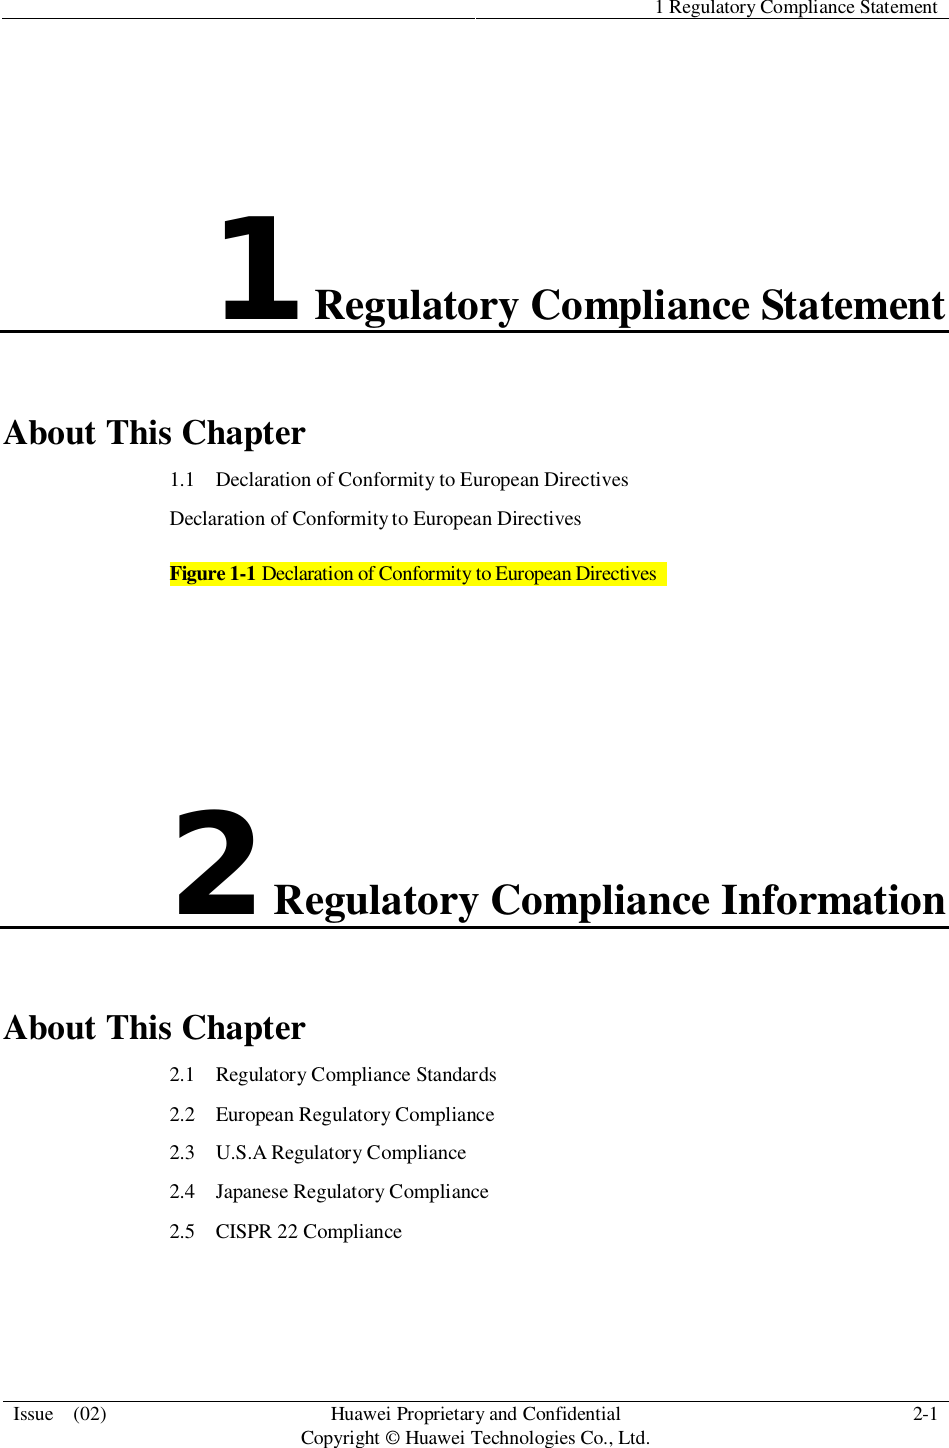 1 Regulatory Compliance StatementIssue  (02) HuaweiProprietary and ConfidentialCopyright © Huawei Technologies Co., Ltd. 2-11Regulatory Compliance StatementAbout This Chapter1.1   Declaration of Conformity to European DirectivesDeclaration of Conformityto European DirectivesFigure 1-1 Declaration of Conformity to European Directives2Regulatory Compliance InformationAbout This Chapter2.1   Regulatory Compliance Standards2.2   European Regulatory Compliance2.3   U.S.A Regulatory Compliance2.4   Japanese Regulatory Compliance2.5   CISPR 22 Compliance